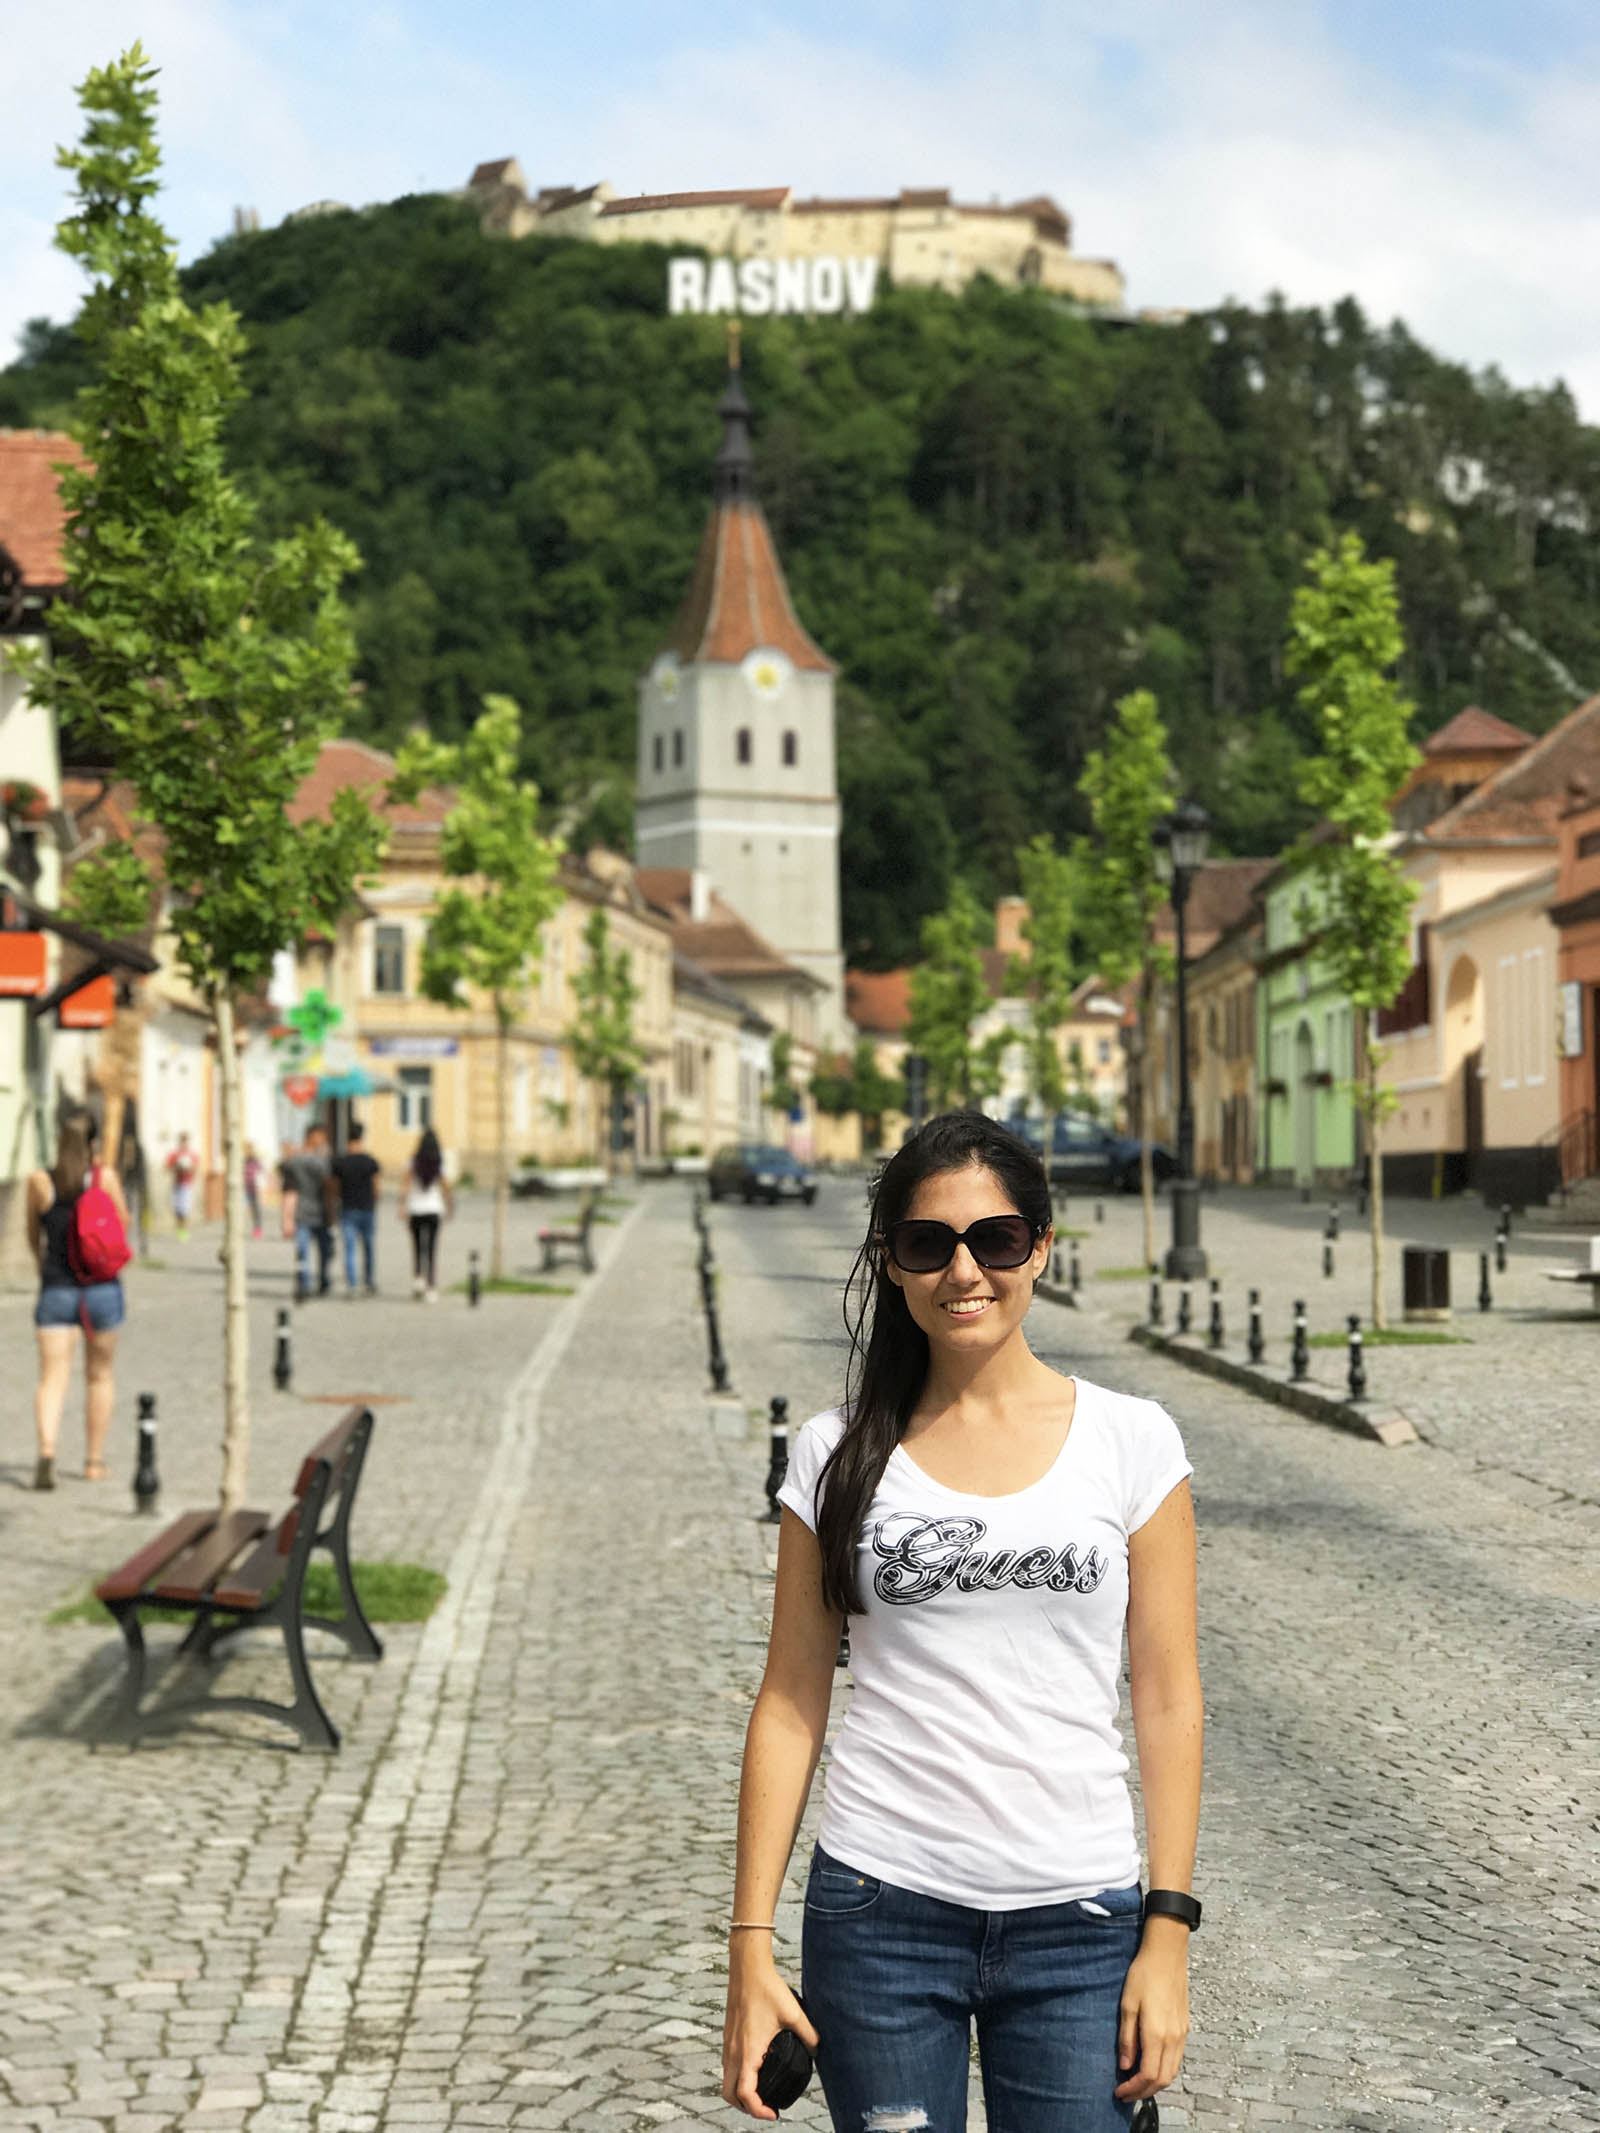 The fortress and the church as a backdrop with the Rasnov “Hollywood” style sign. Credit: Christian Bergara